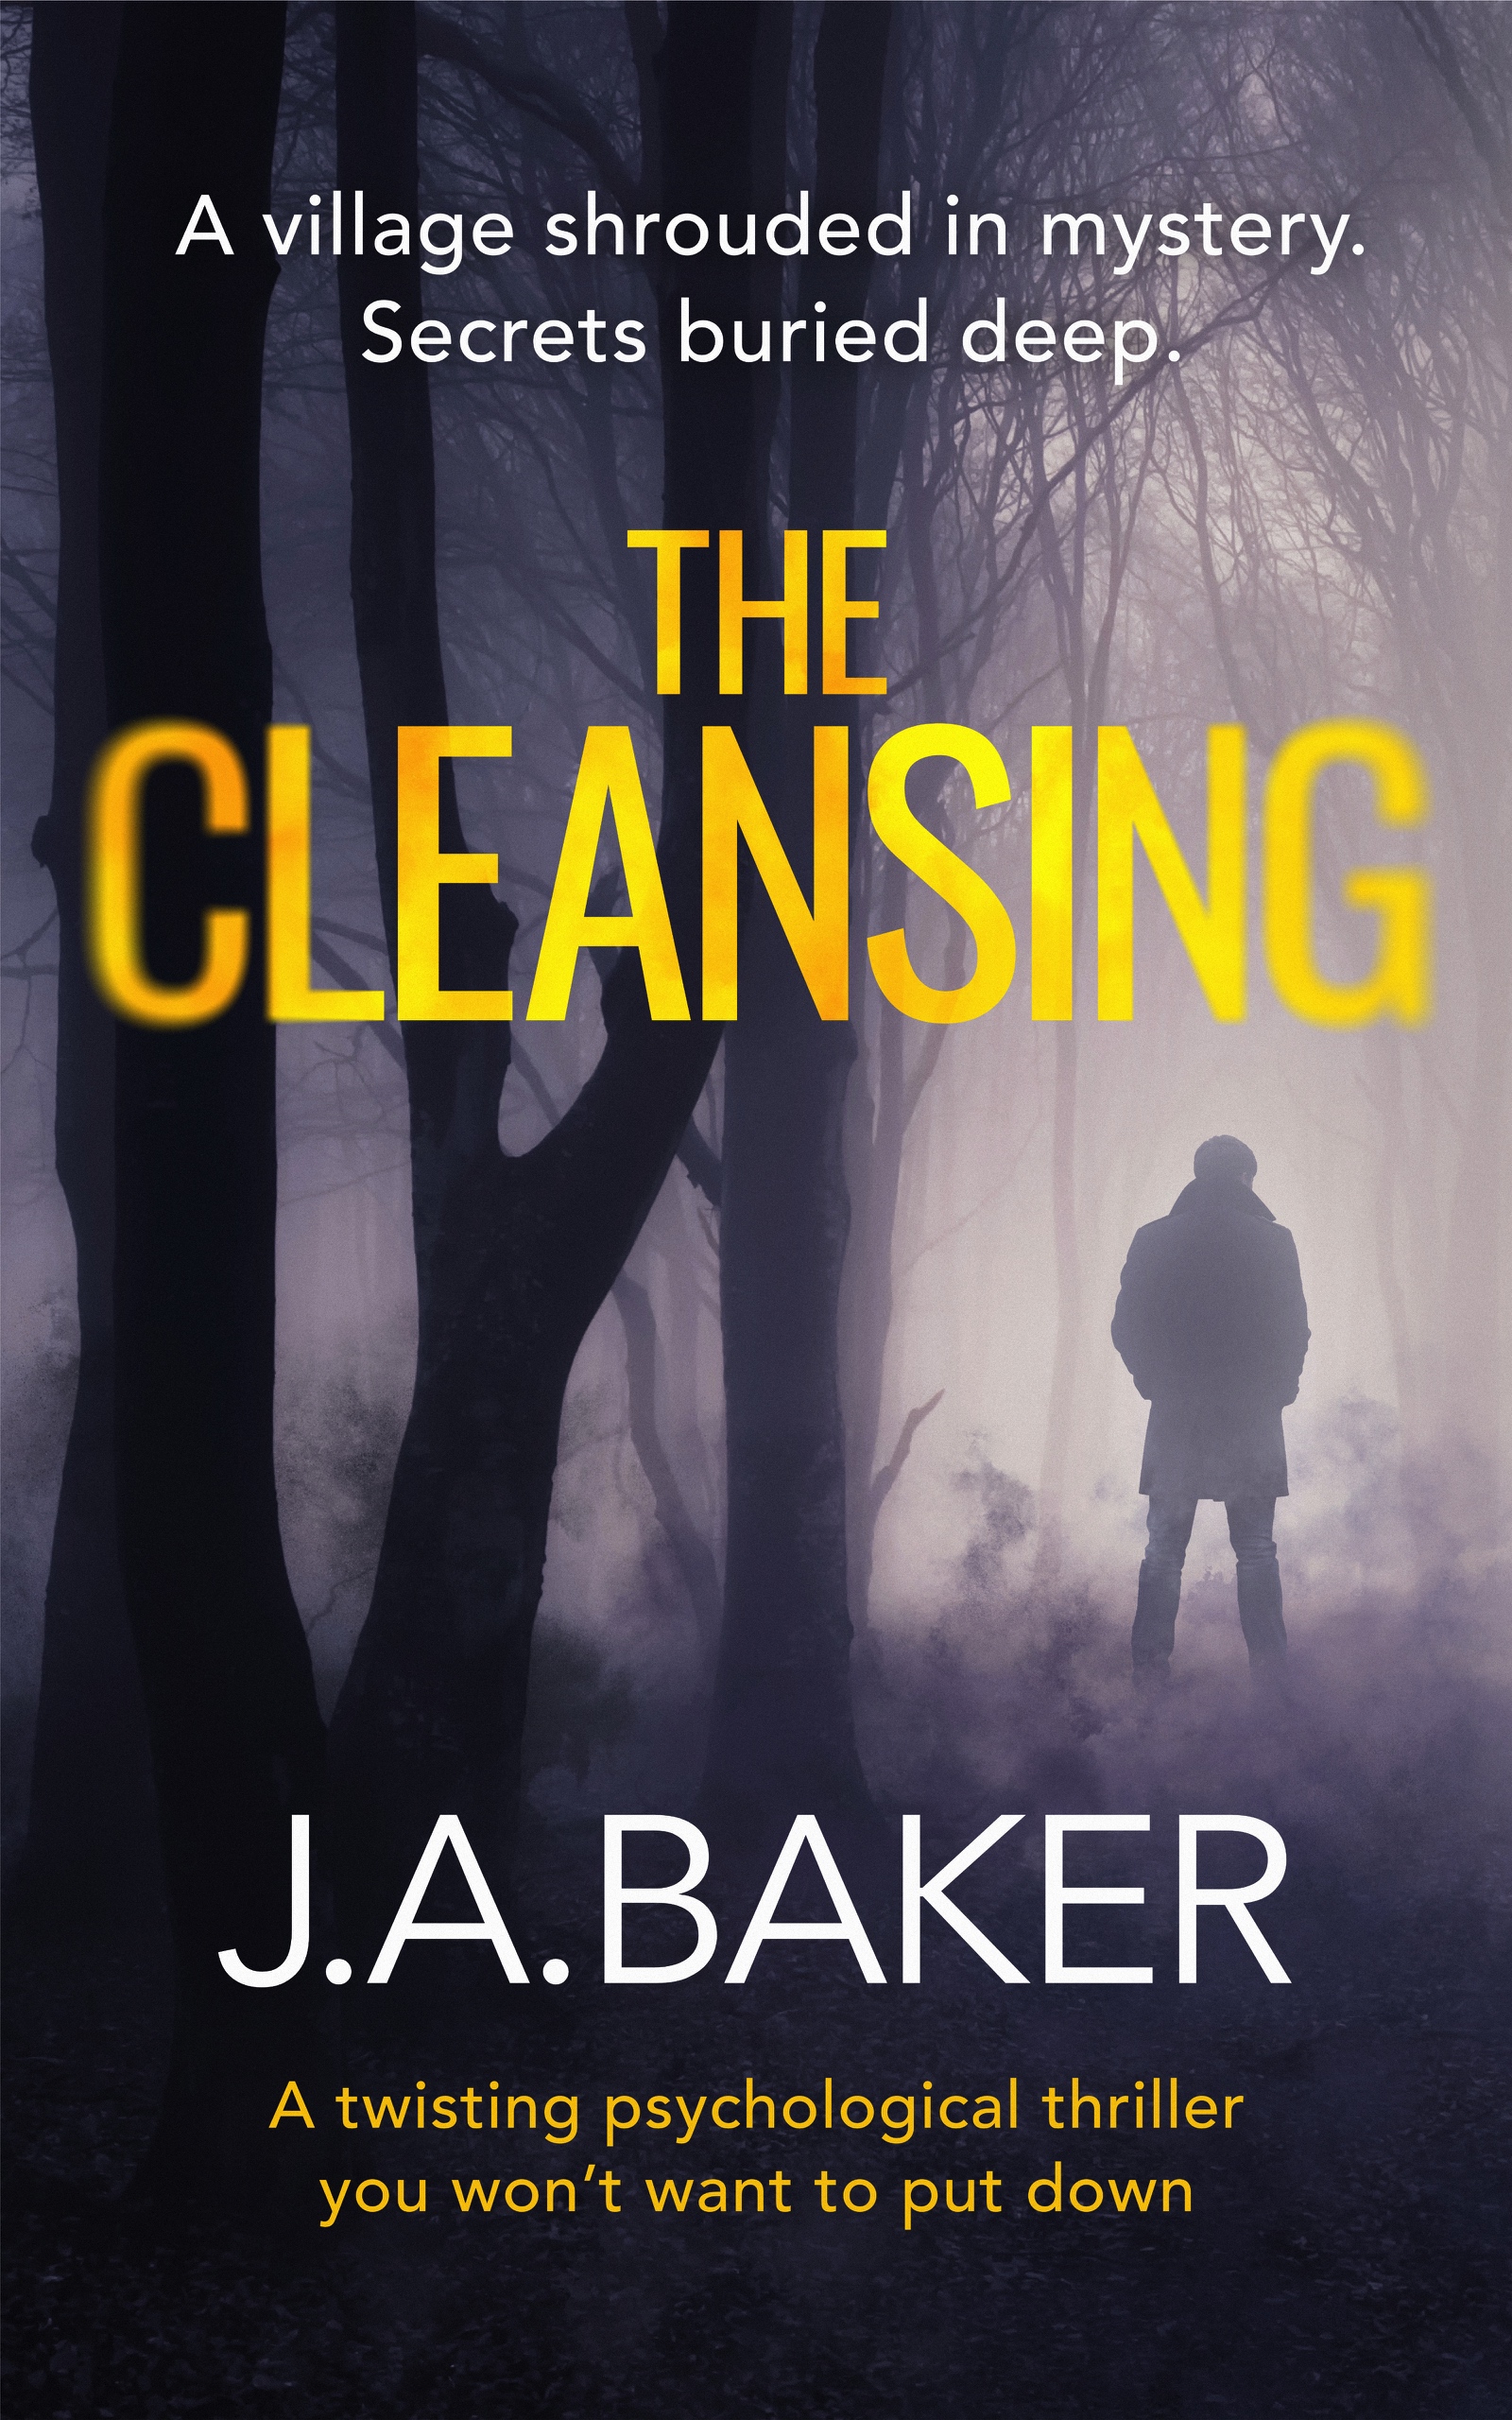 The-Cleansing-Kindle.jpg